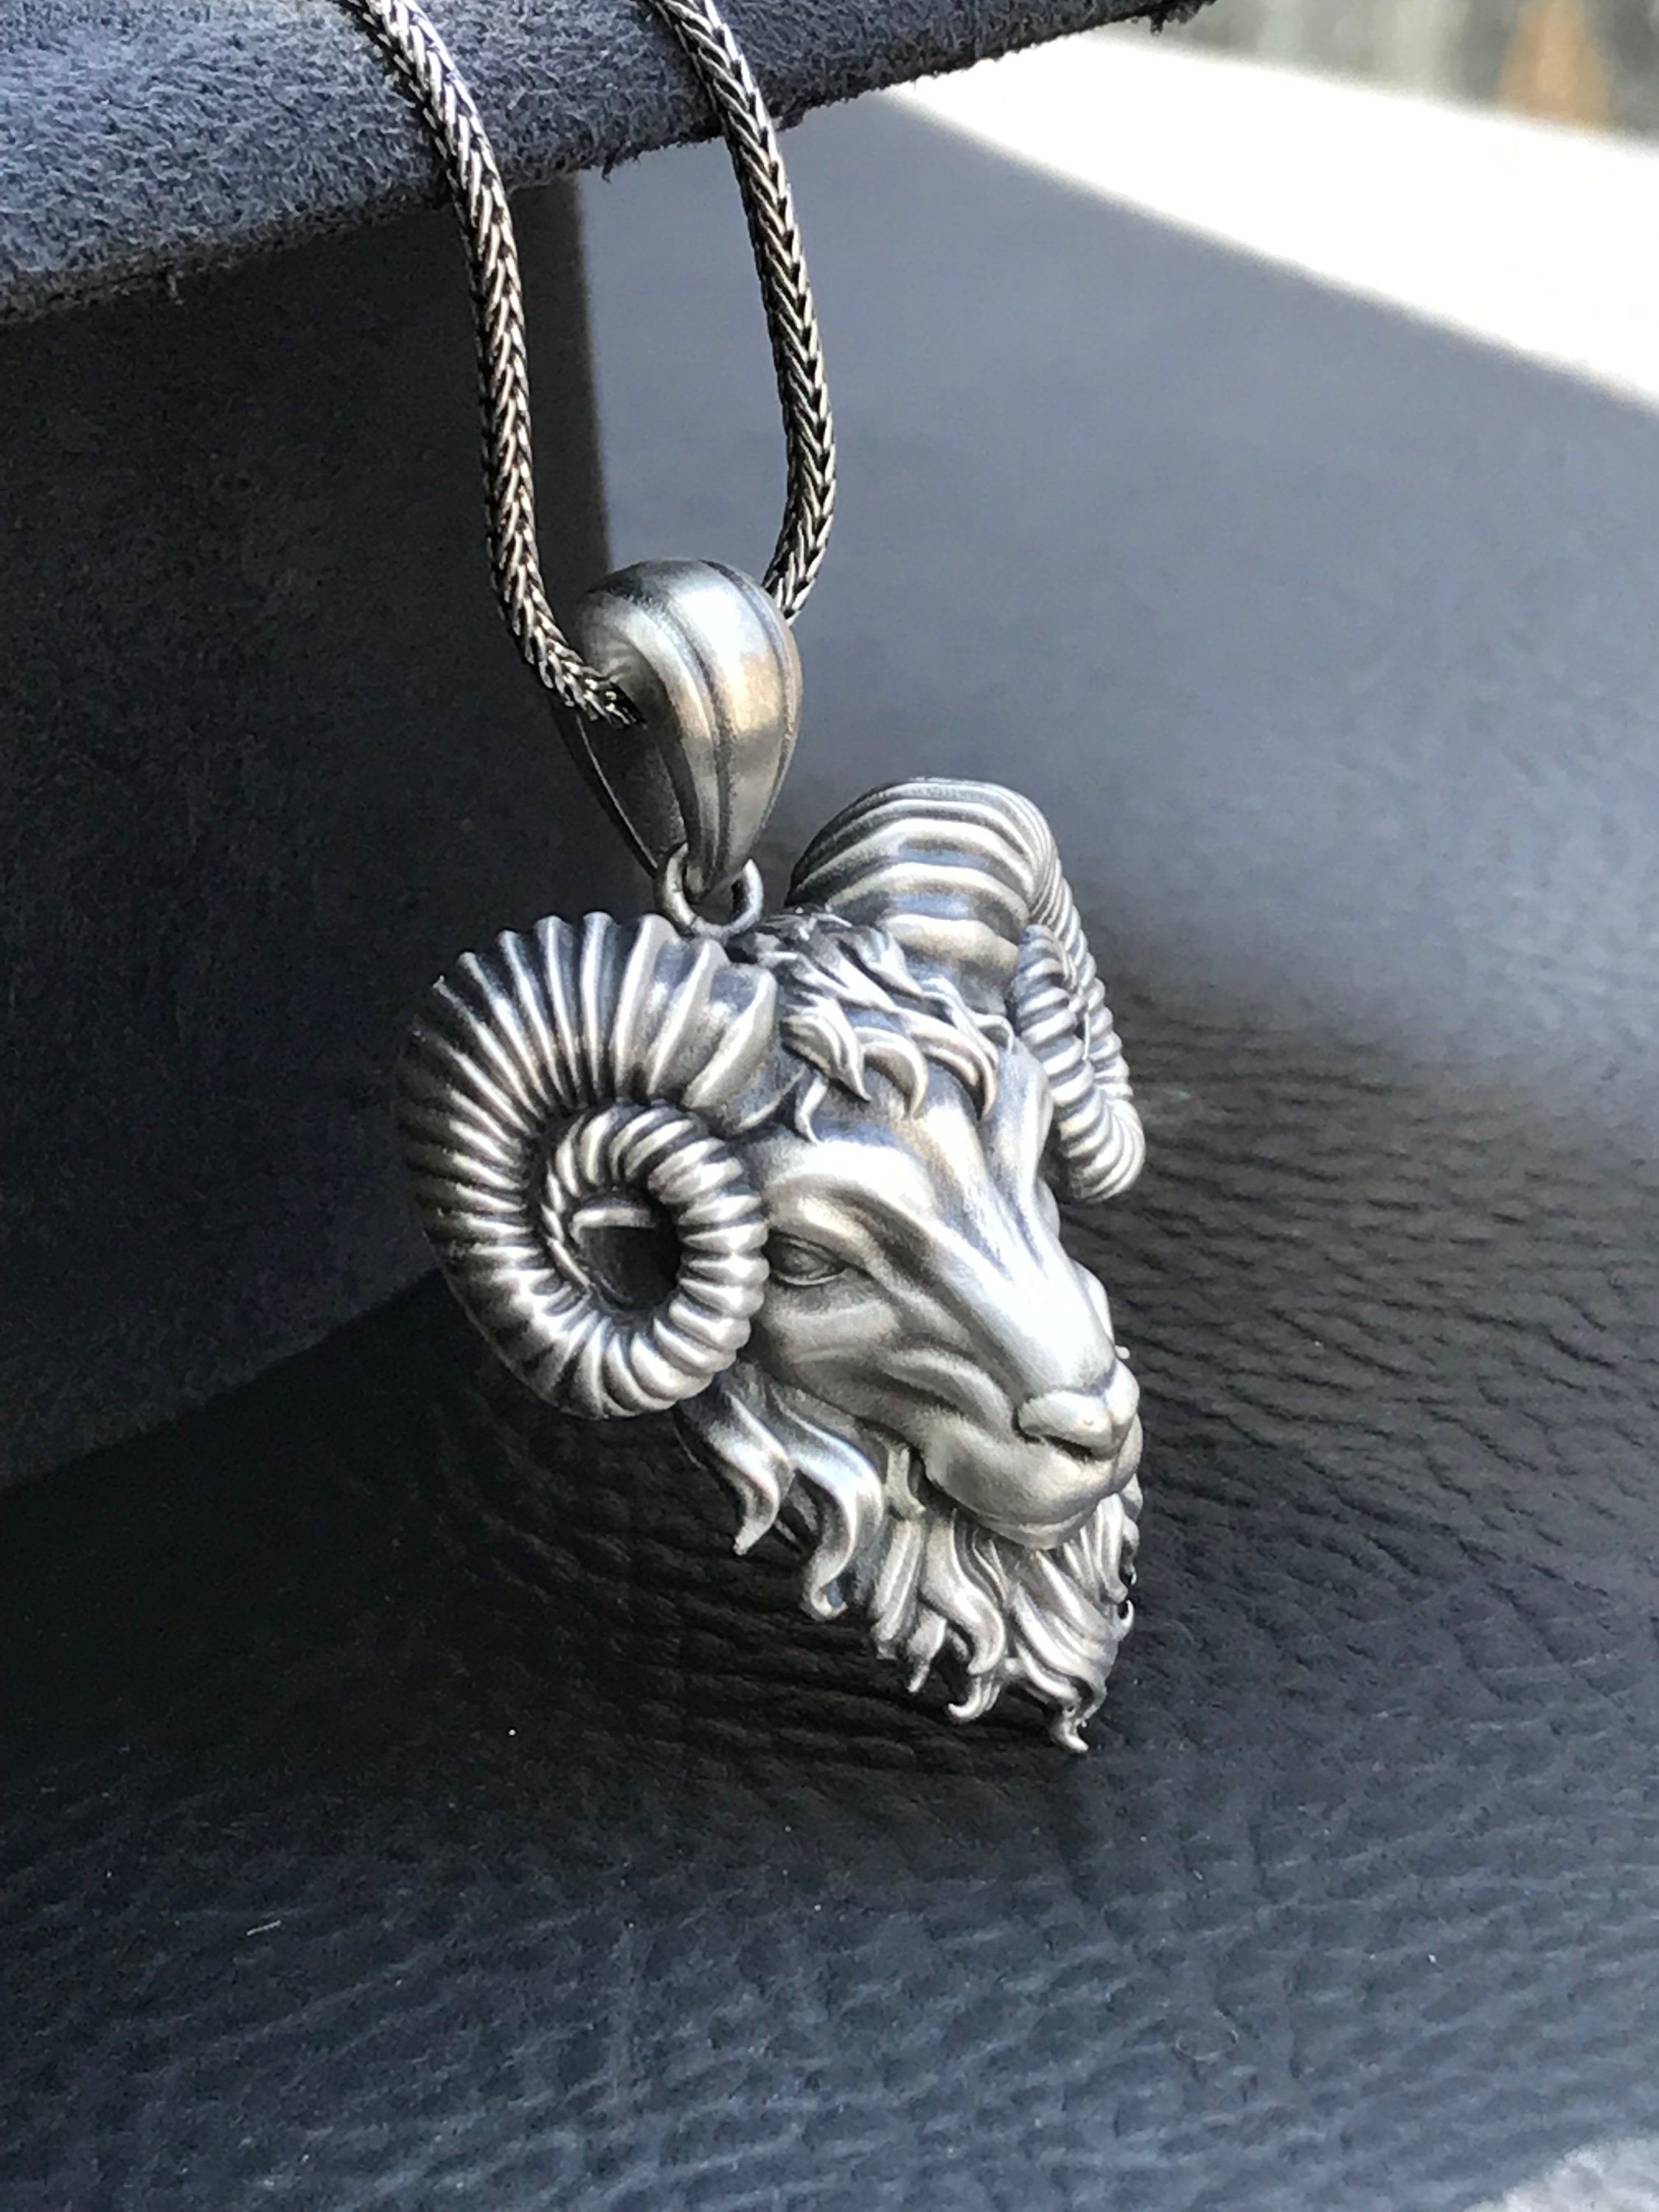 Ram Head Necklace Animal Aries Pendant Men's Jewelry Gift Birthday Father's Day Women's Accessory